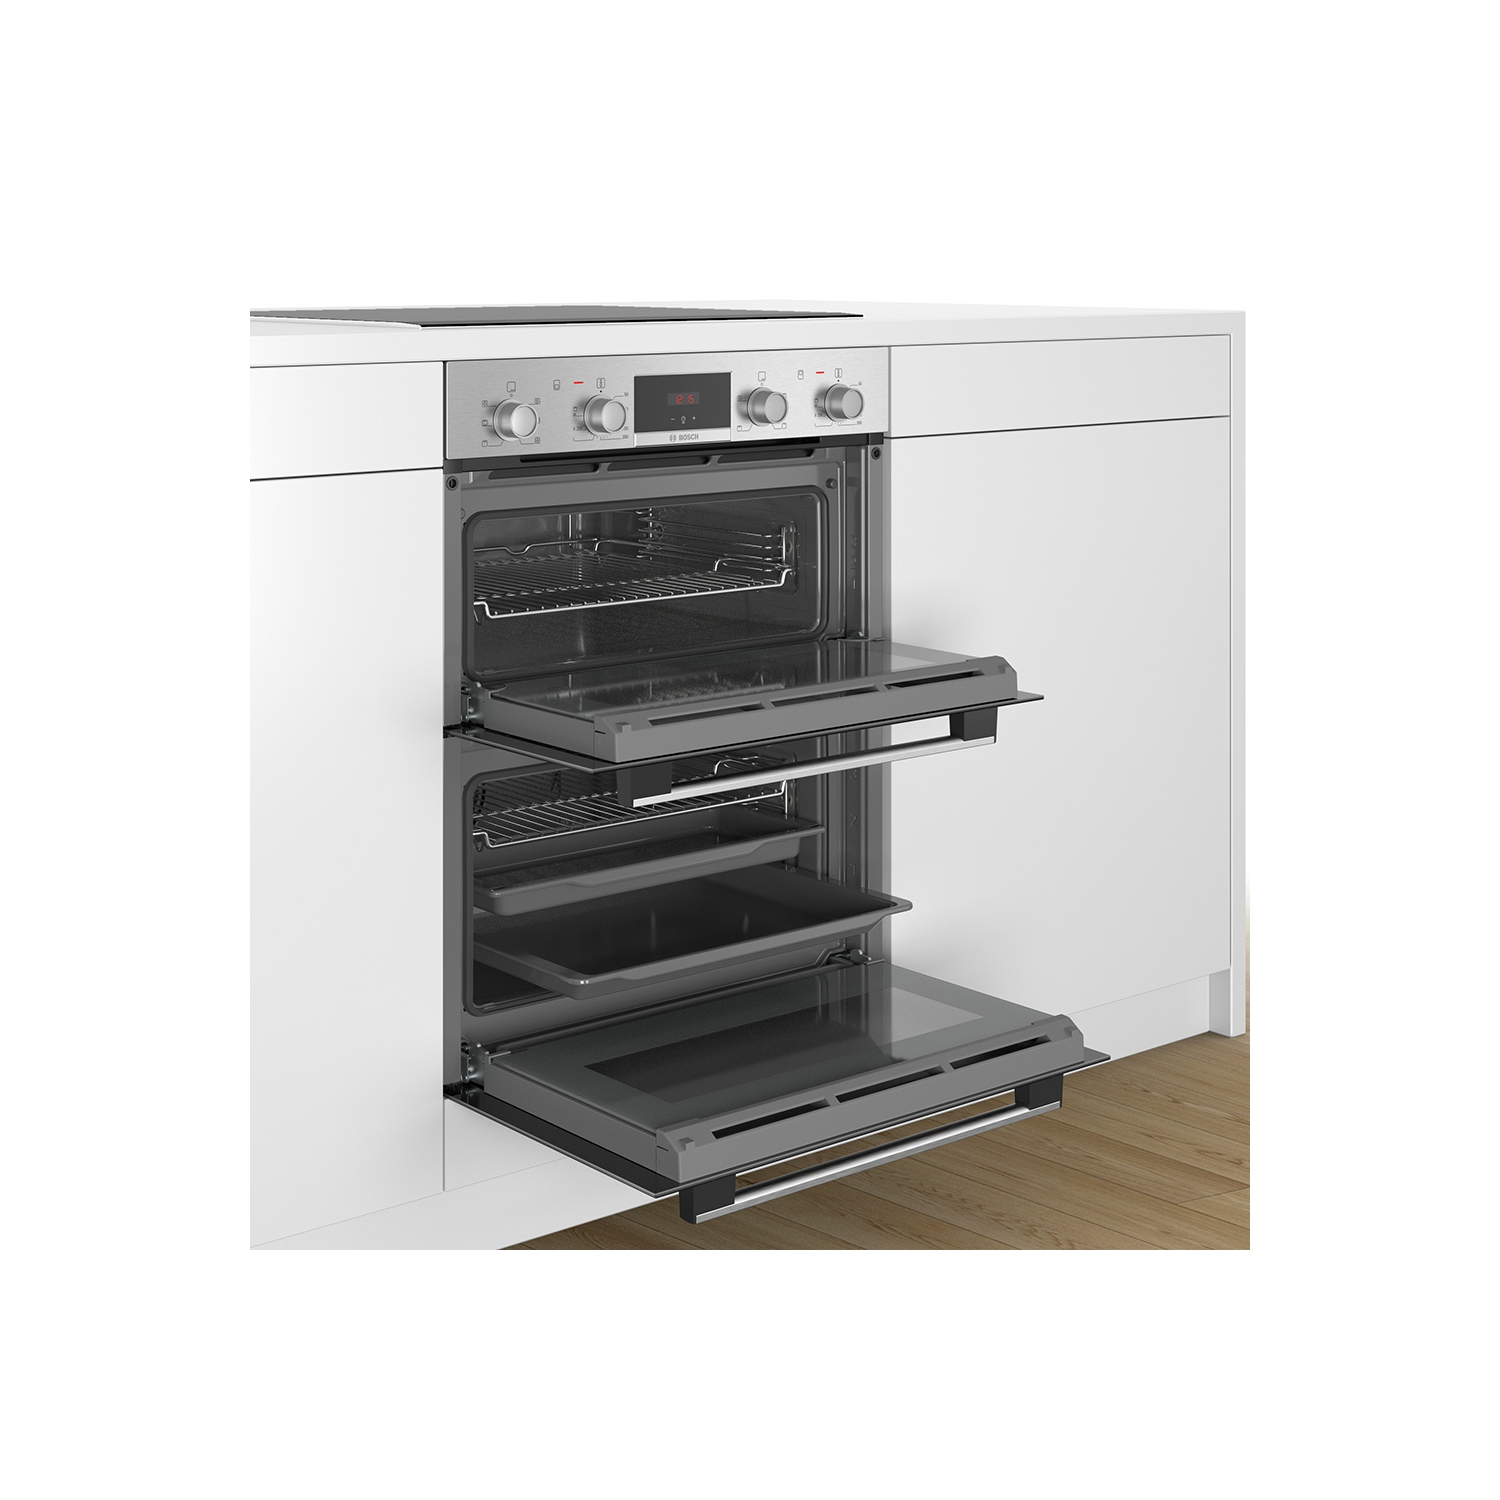 Bosch Built Under Double Oven (stainless steel - A/B energy rating) - 1